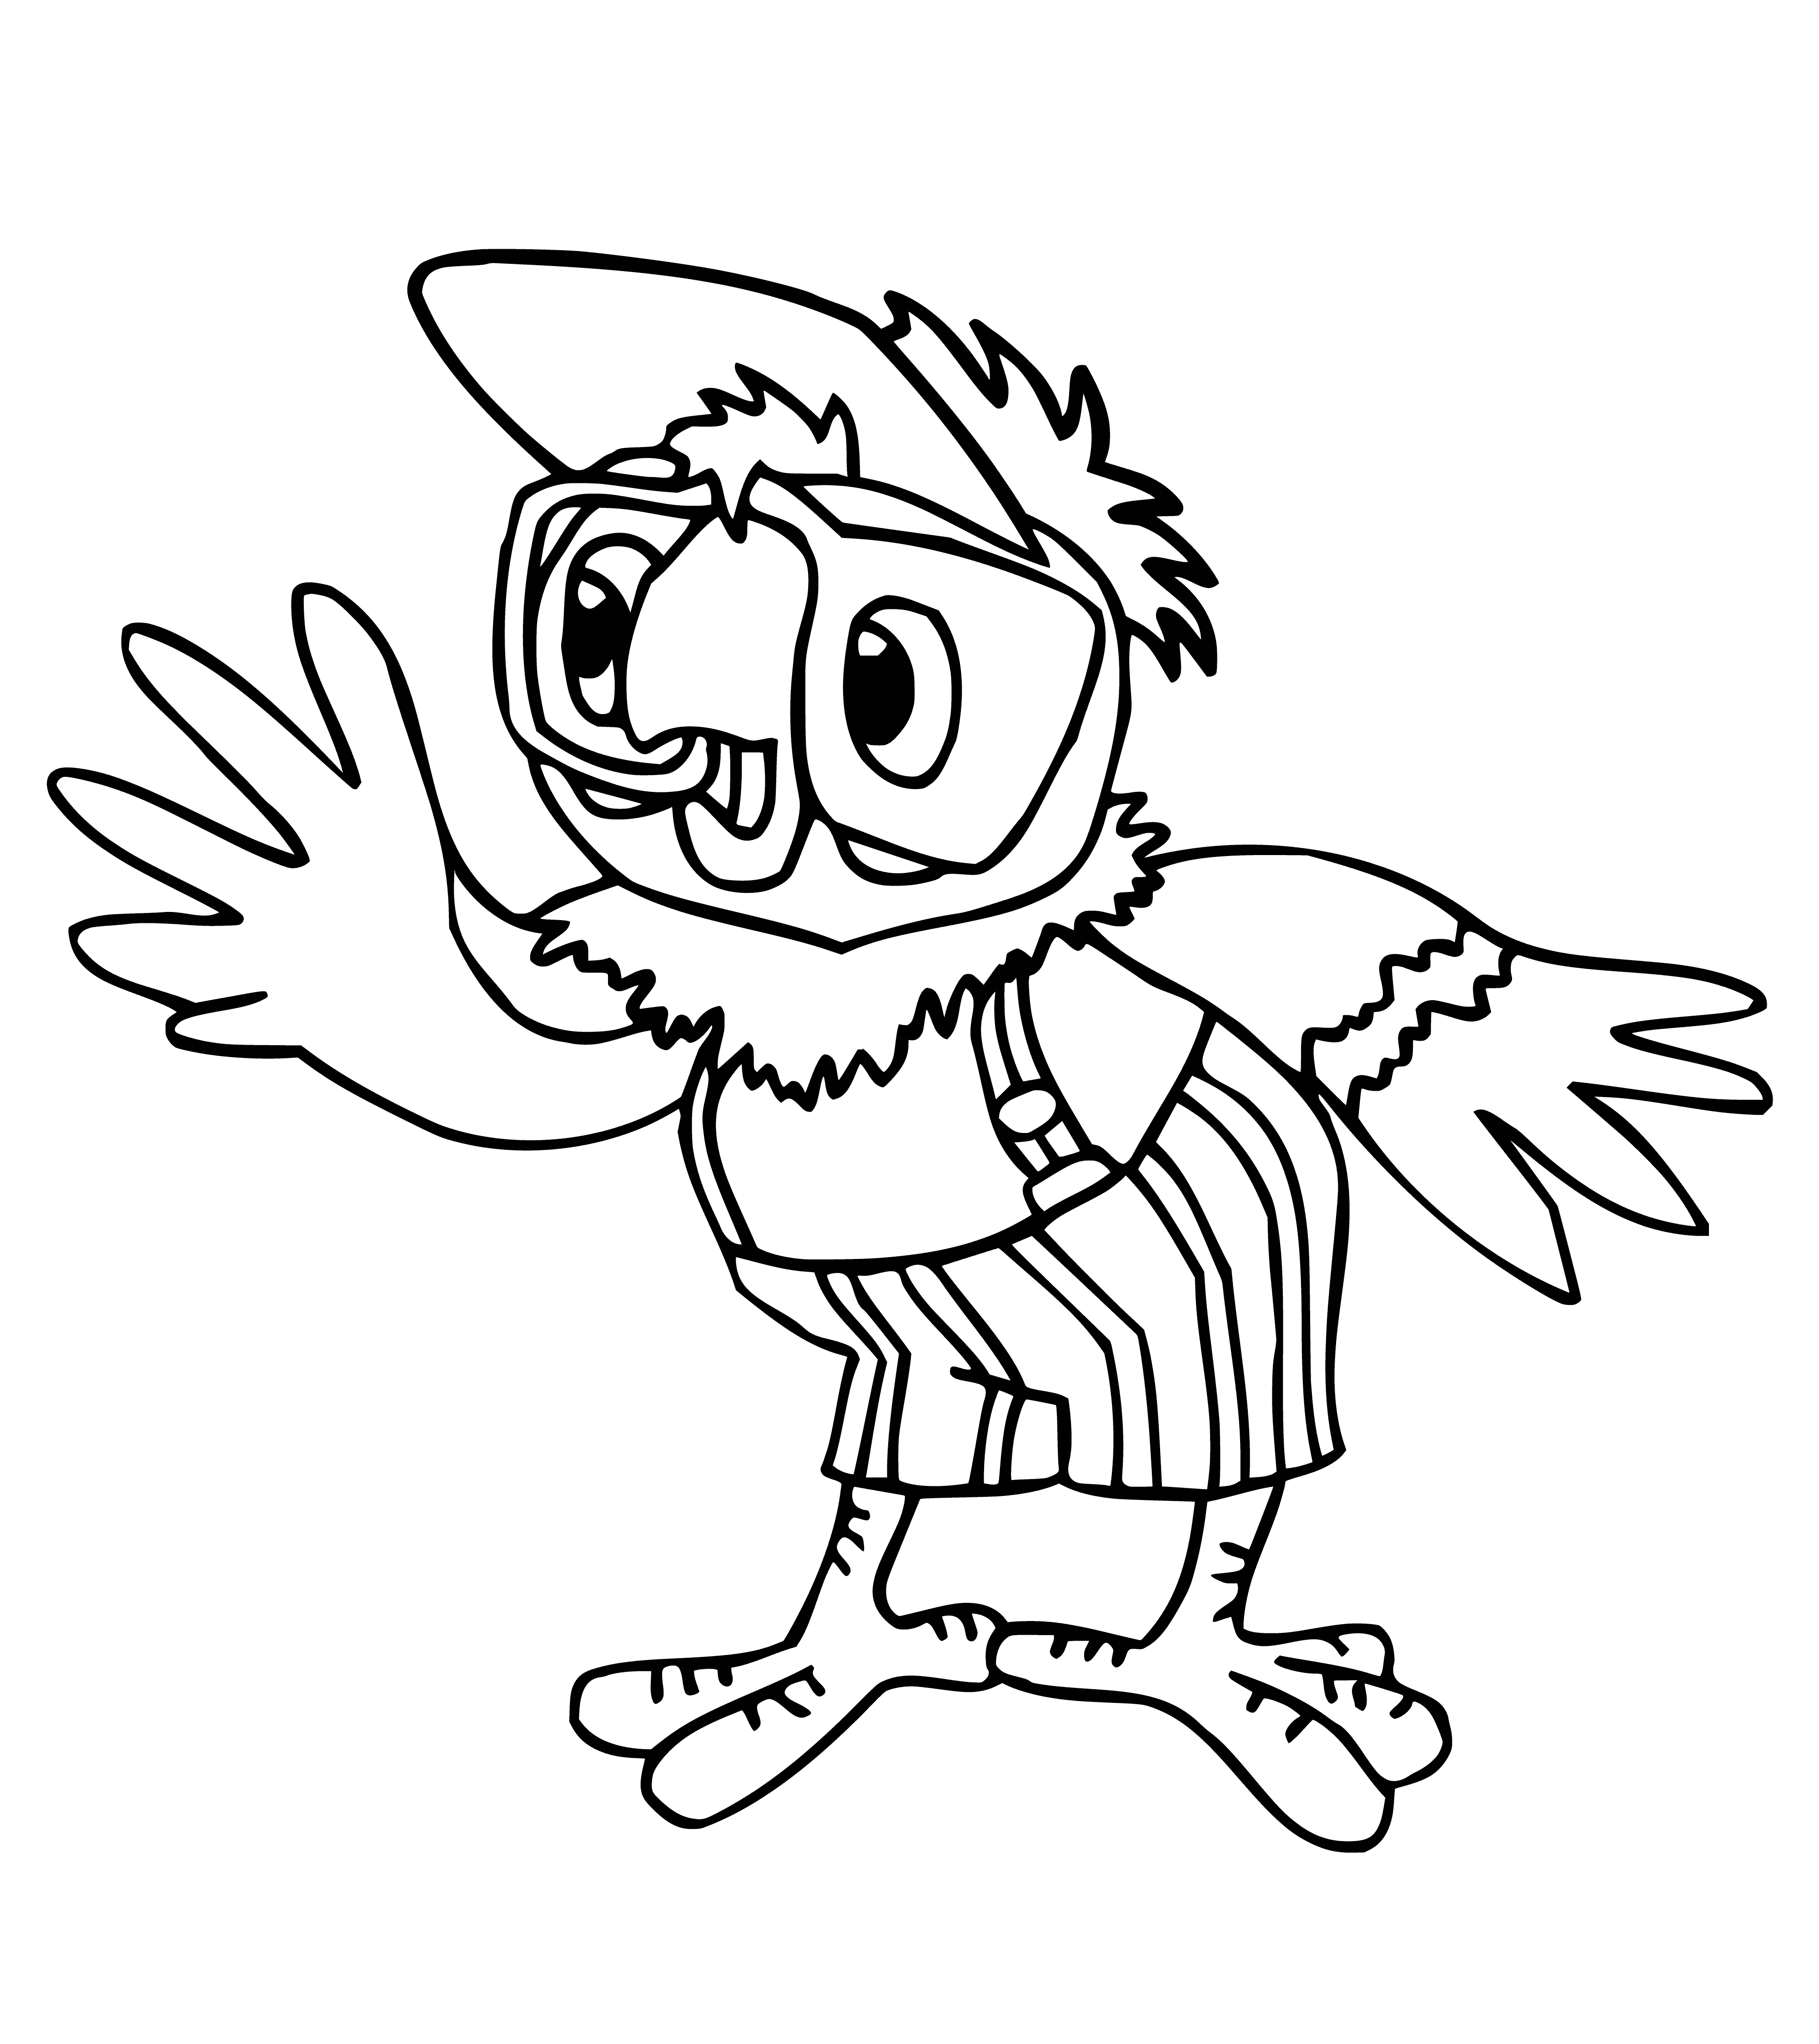 coloring page: Man holds happy parrot, its head tilted towards him, against backdrop of blue sky, green trees.